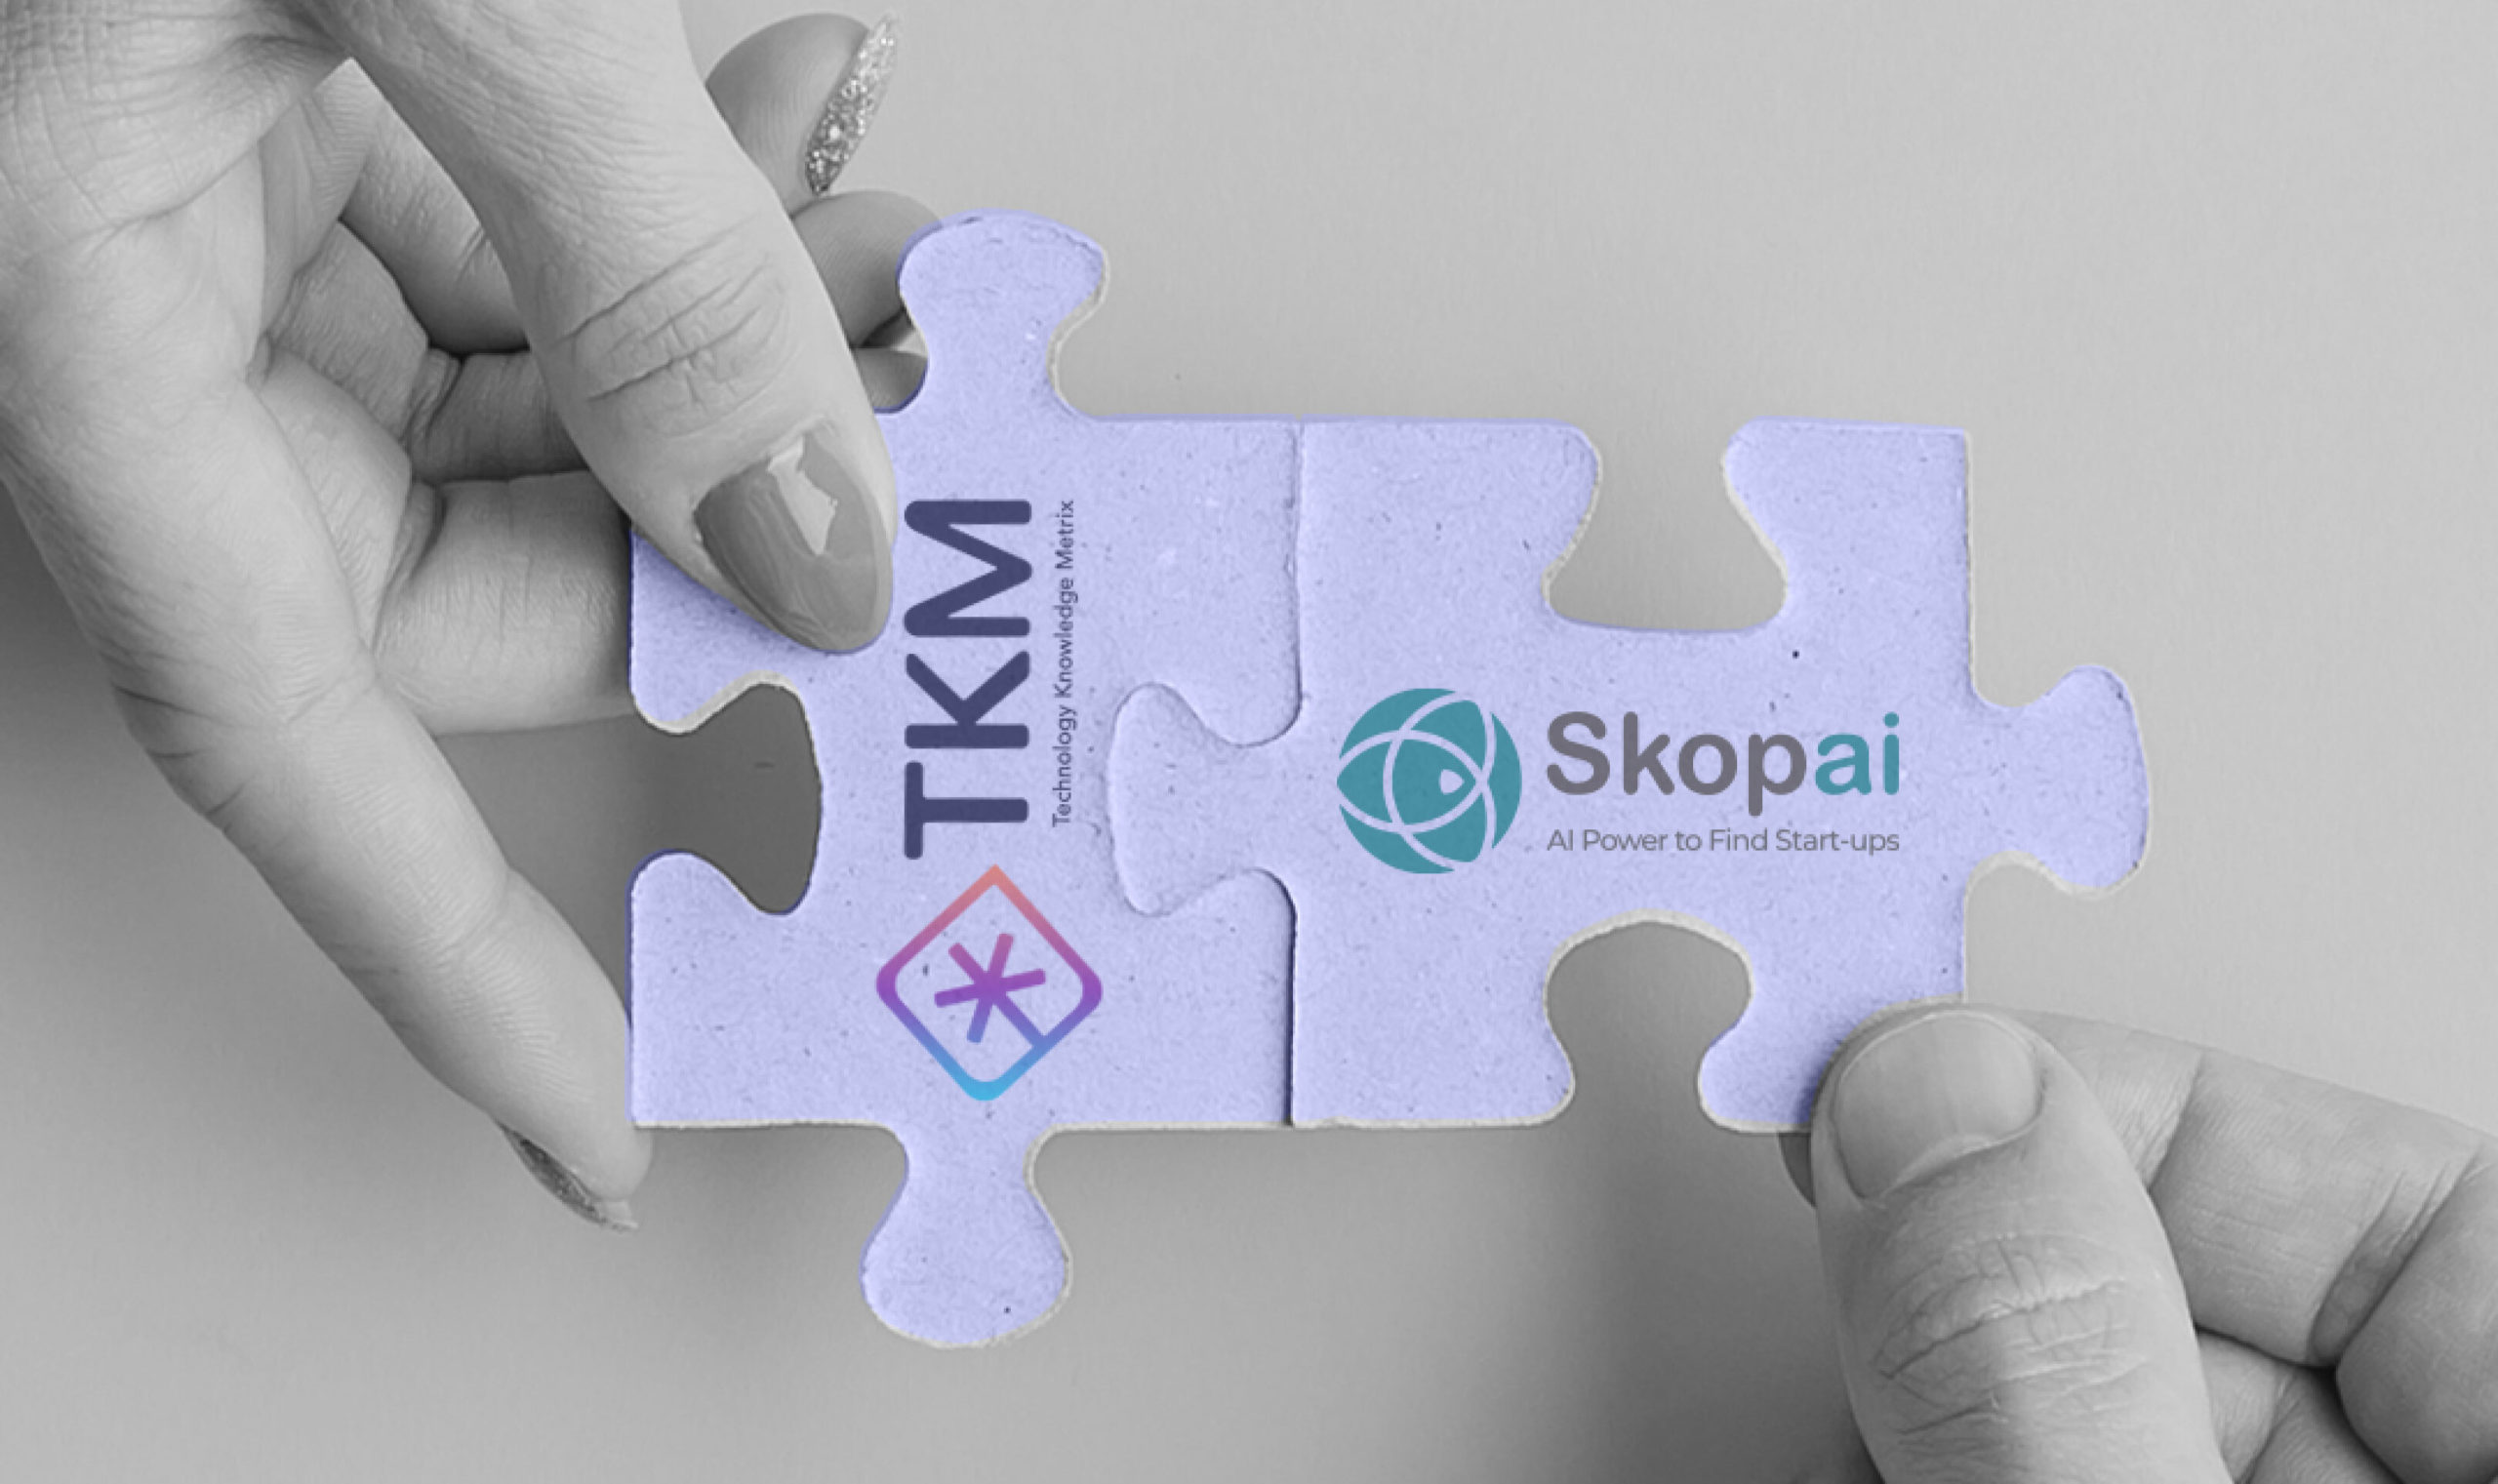 TKM acquires the technological assets of Grenoble start-up Skopai